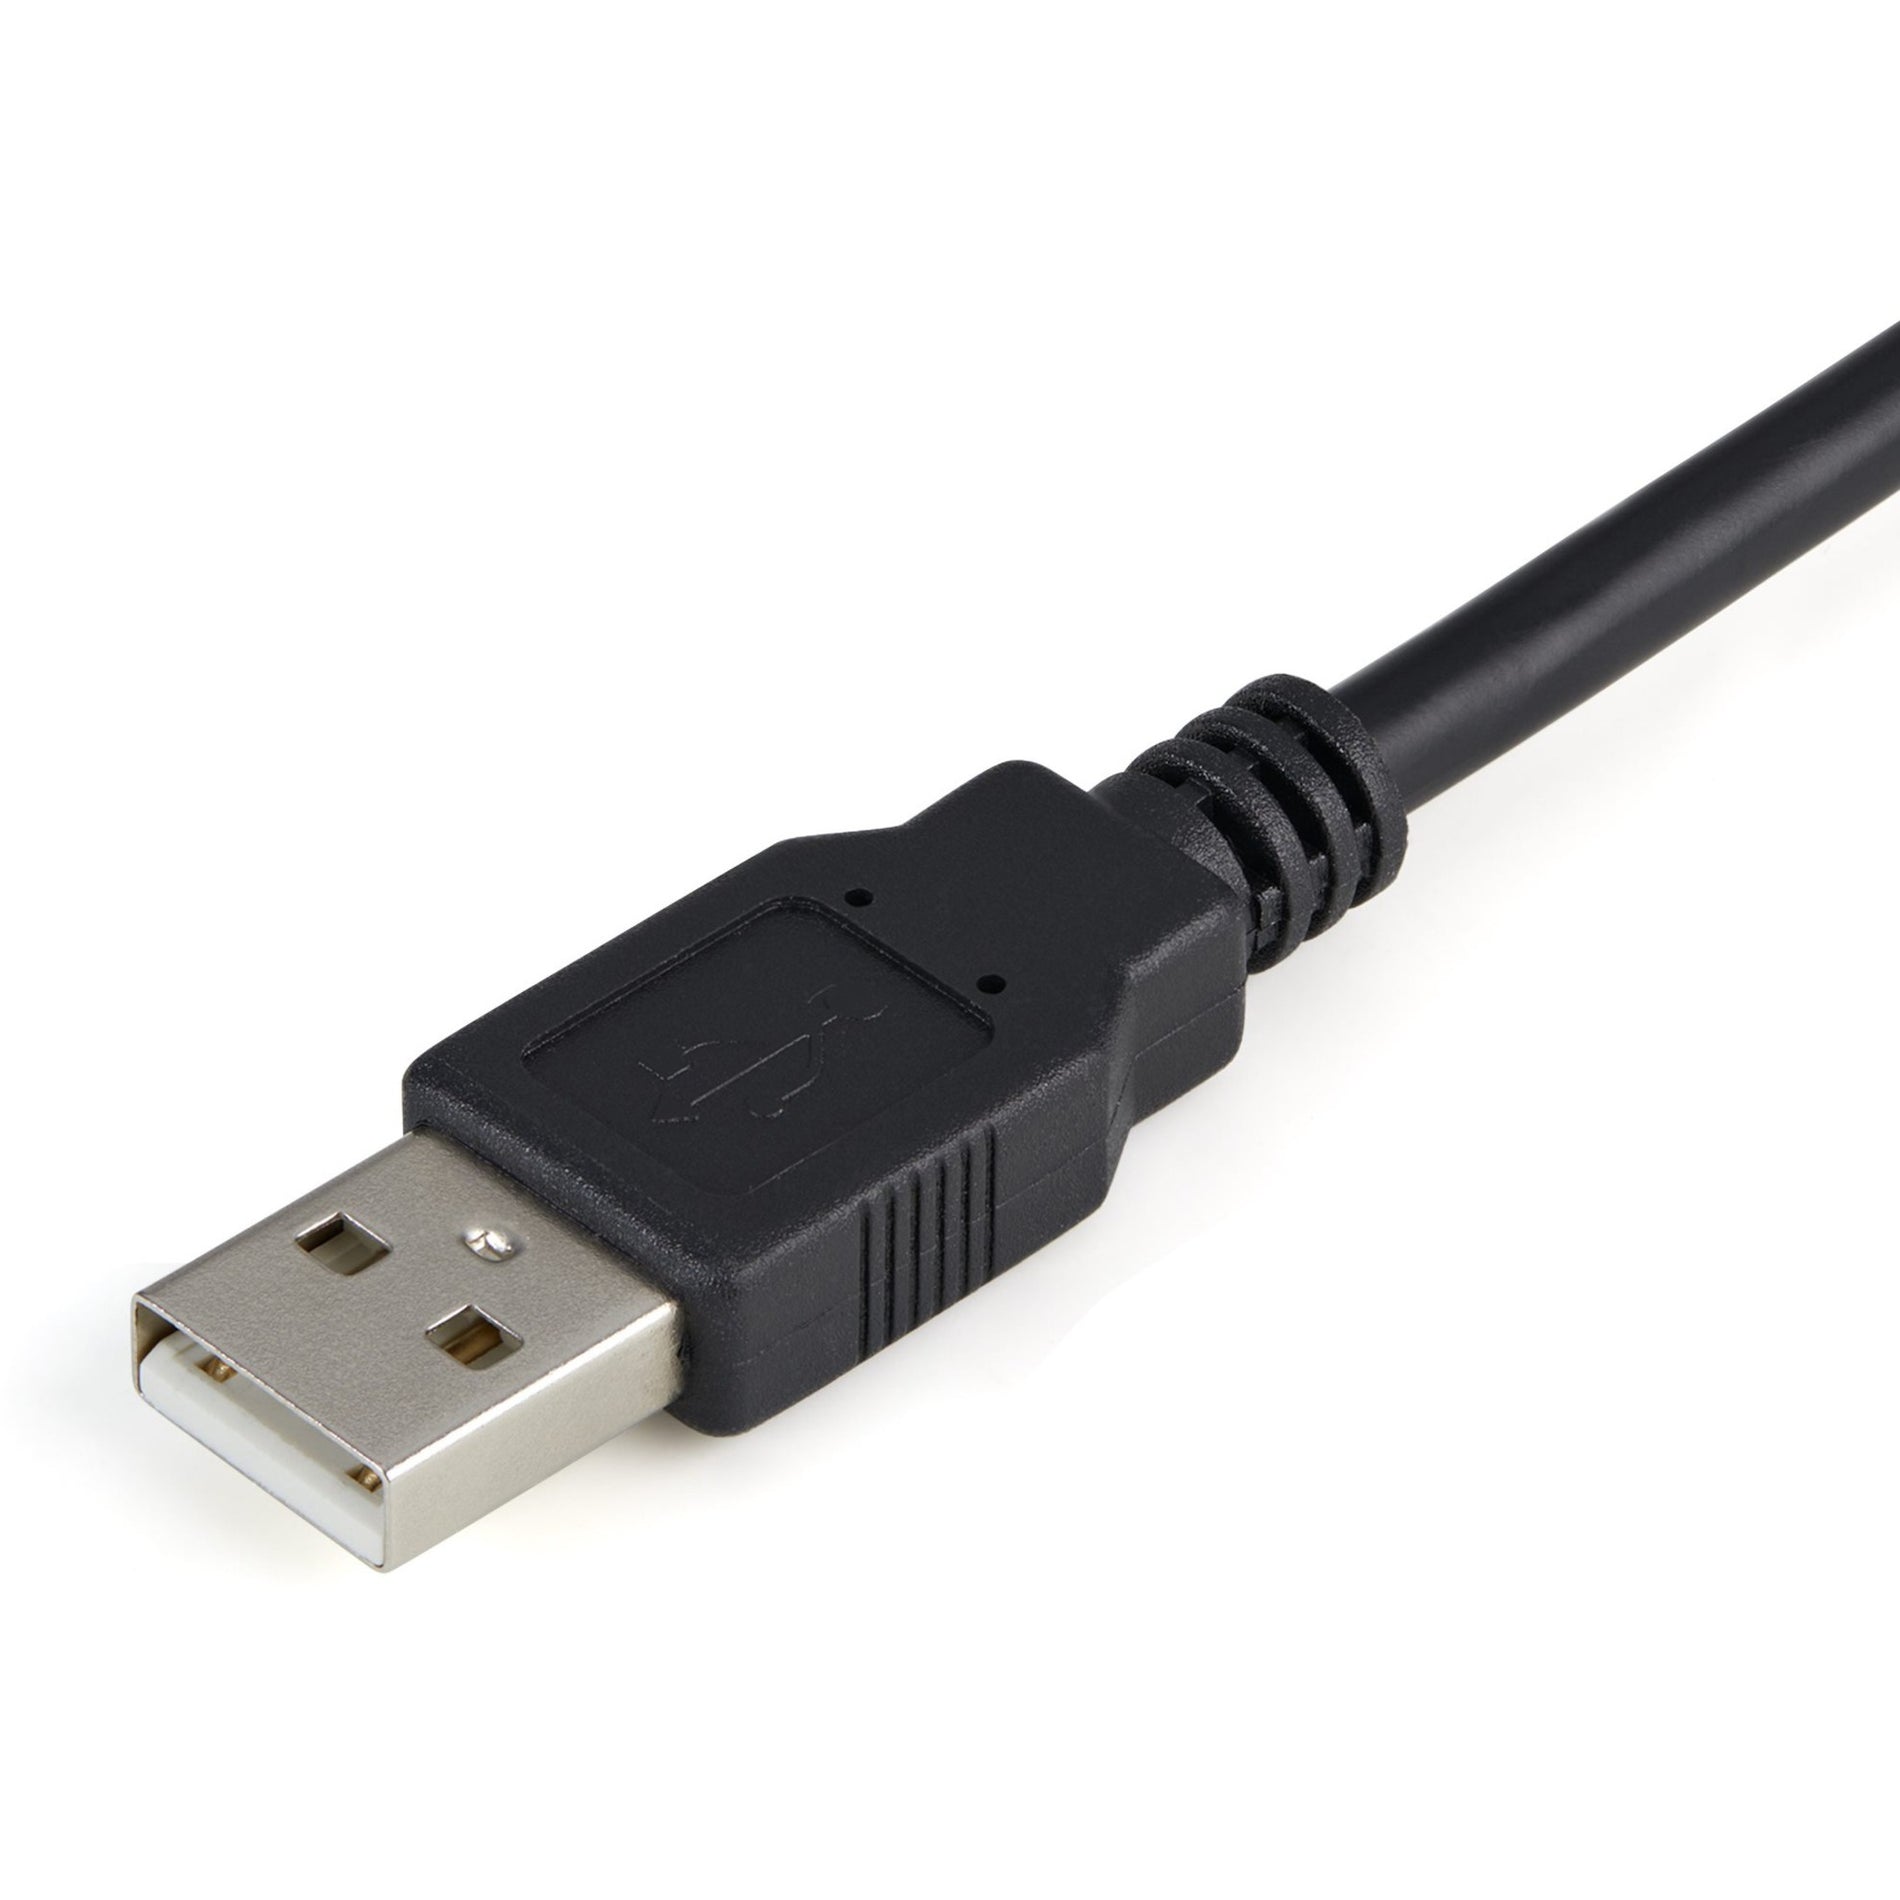 StarTech.com ICUSB2321F 1 Port FTDI USB to Serial RS232 Adapter Cable with COM Retention, 6 ft, Black